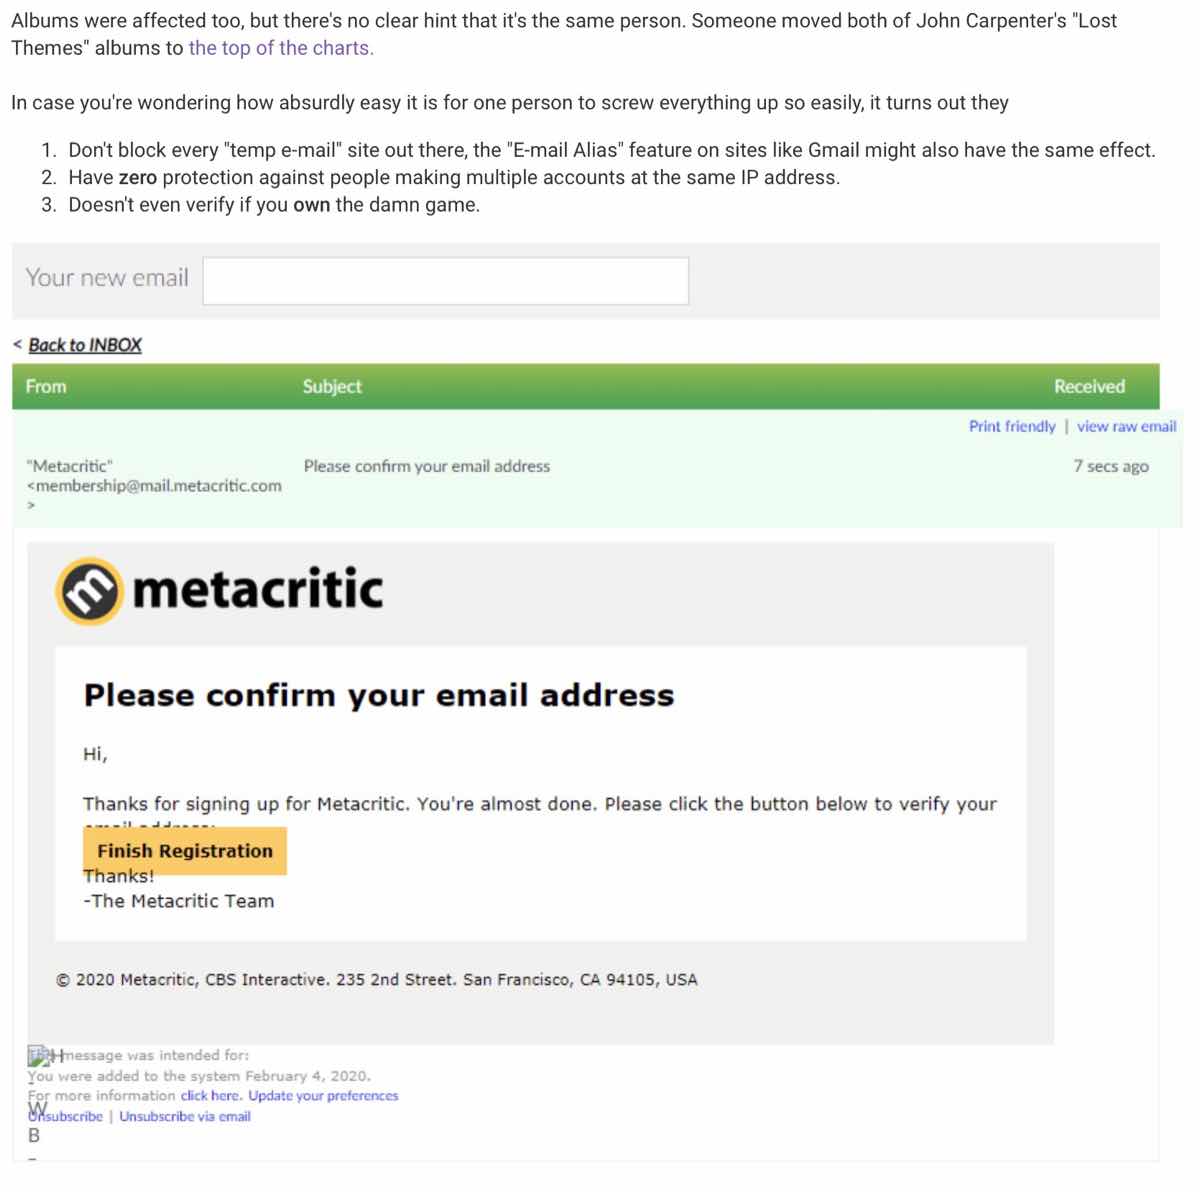 The ResetEra member documented “how absurdly easy it is” for one person to review bomb games on Metacritic